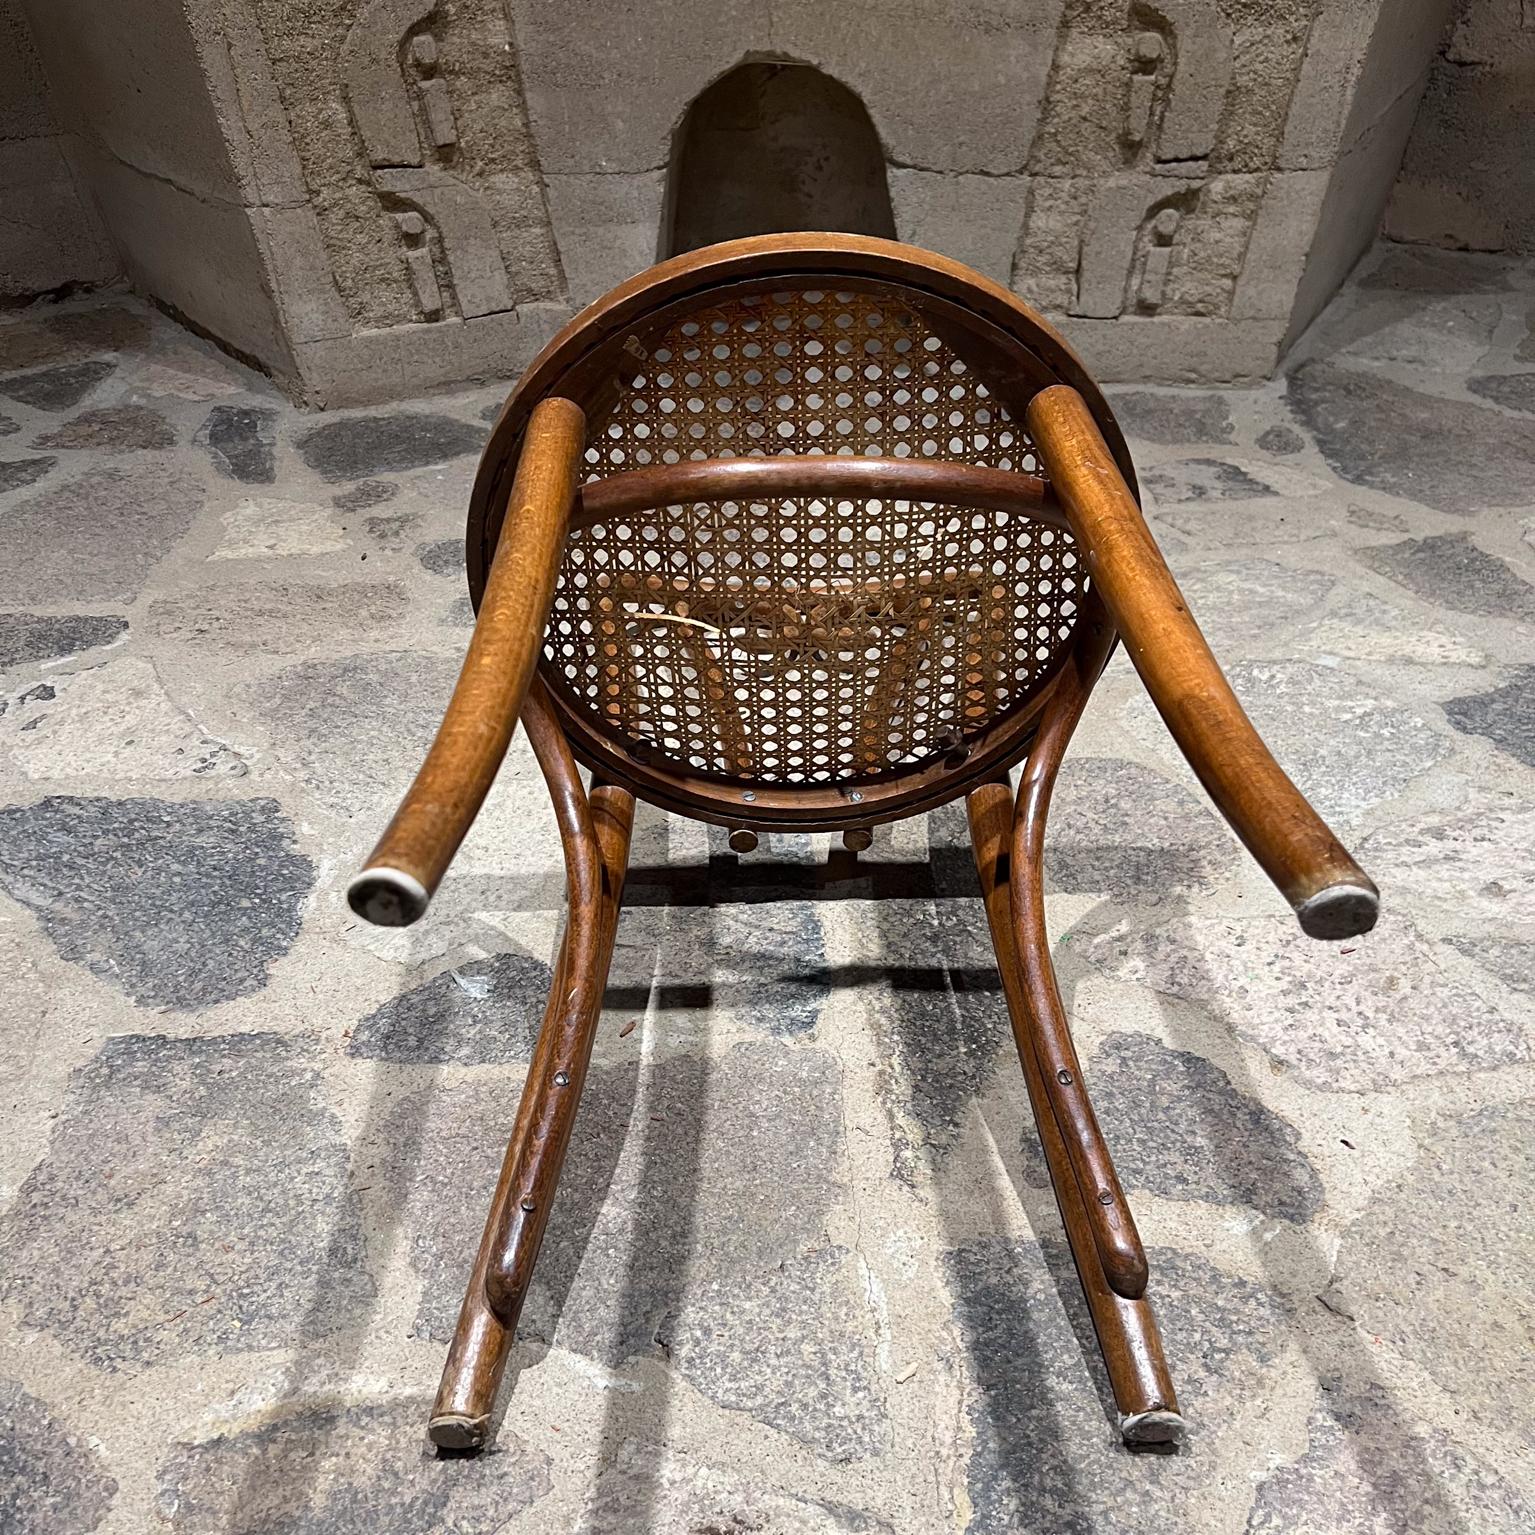 1960s Michael Thonet A16 Sweetheart Chair Bentwood hand caned.
35.13 h x 20.25 d x 16.25 w Seat 18.25 h
Partial label
Cafe chair bentwood cane seat.
Preowned original unrestored vintage
See all images provided.